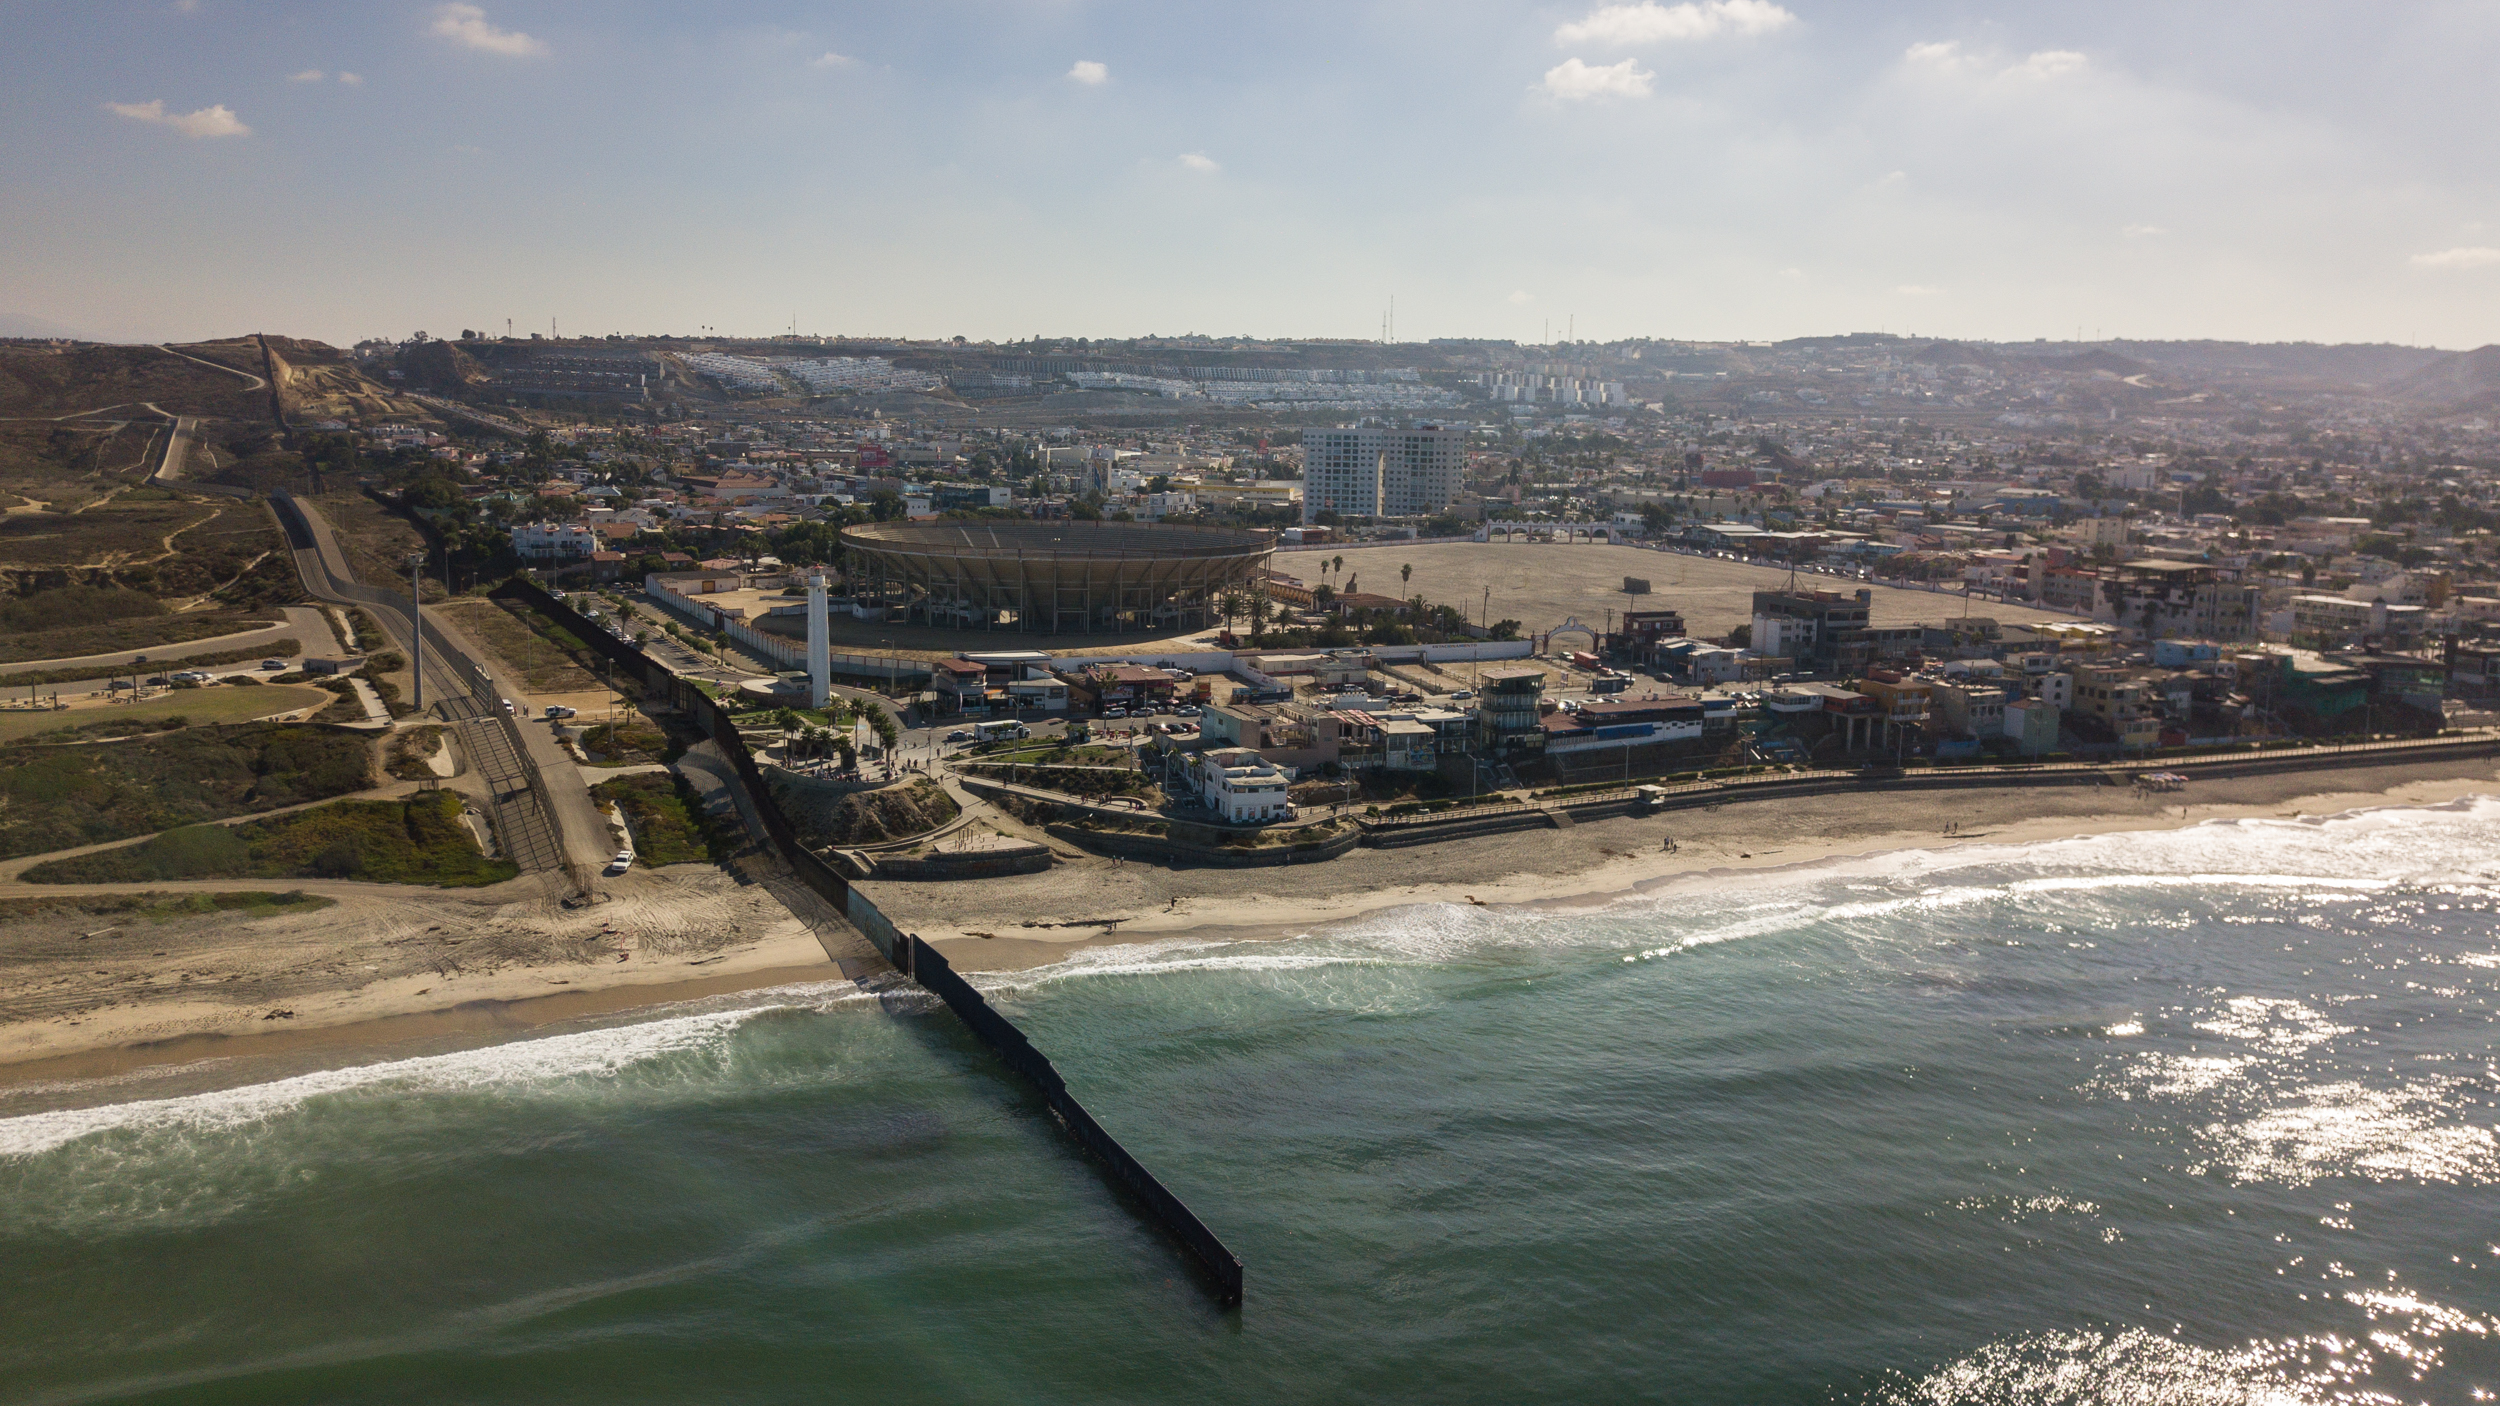 US$300 MM from USMCA to Clean-up Tijuana River Valley